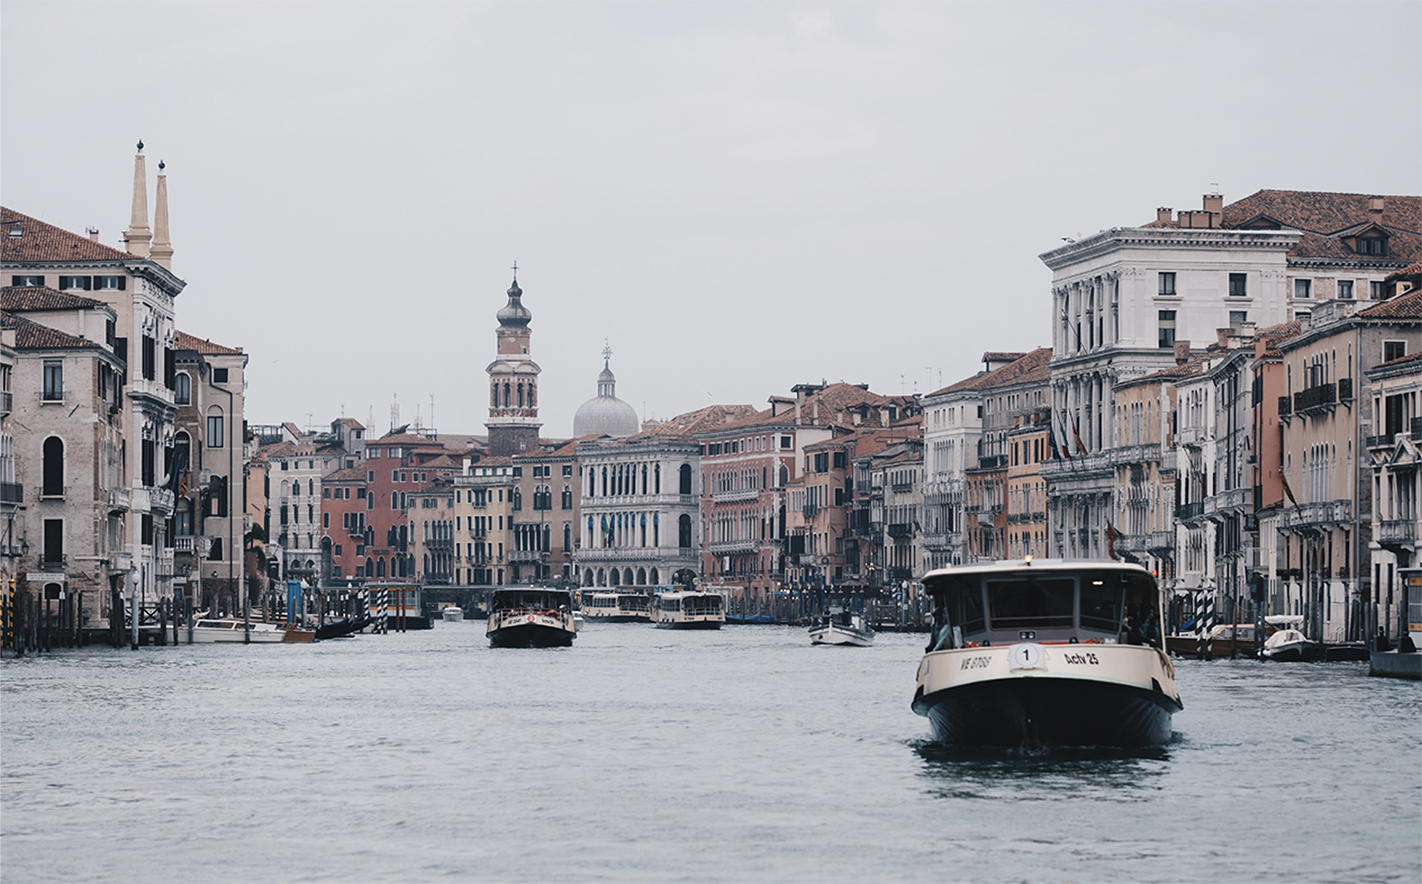 A FAMILY WEEKEND IN VENICE, ANYONE?